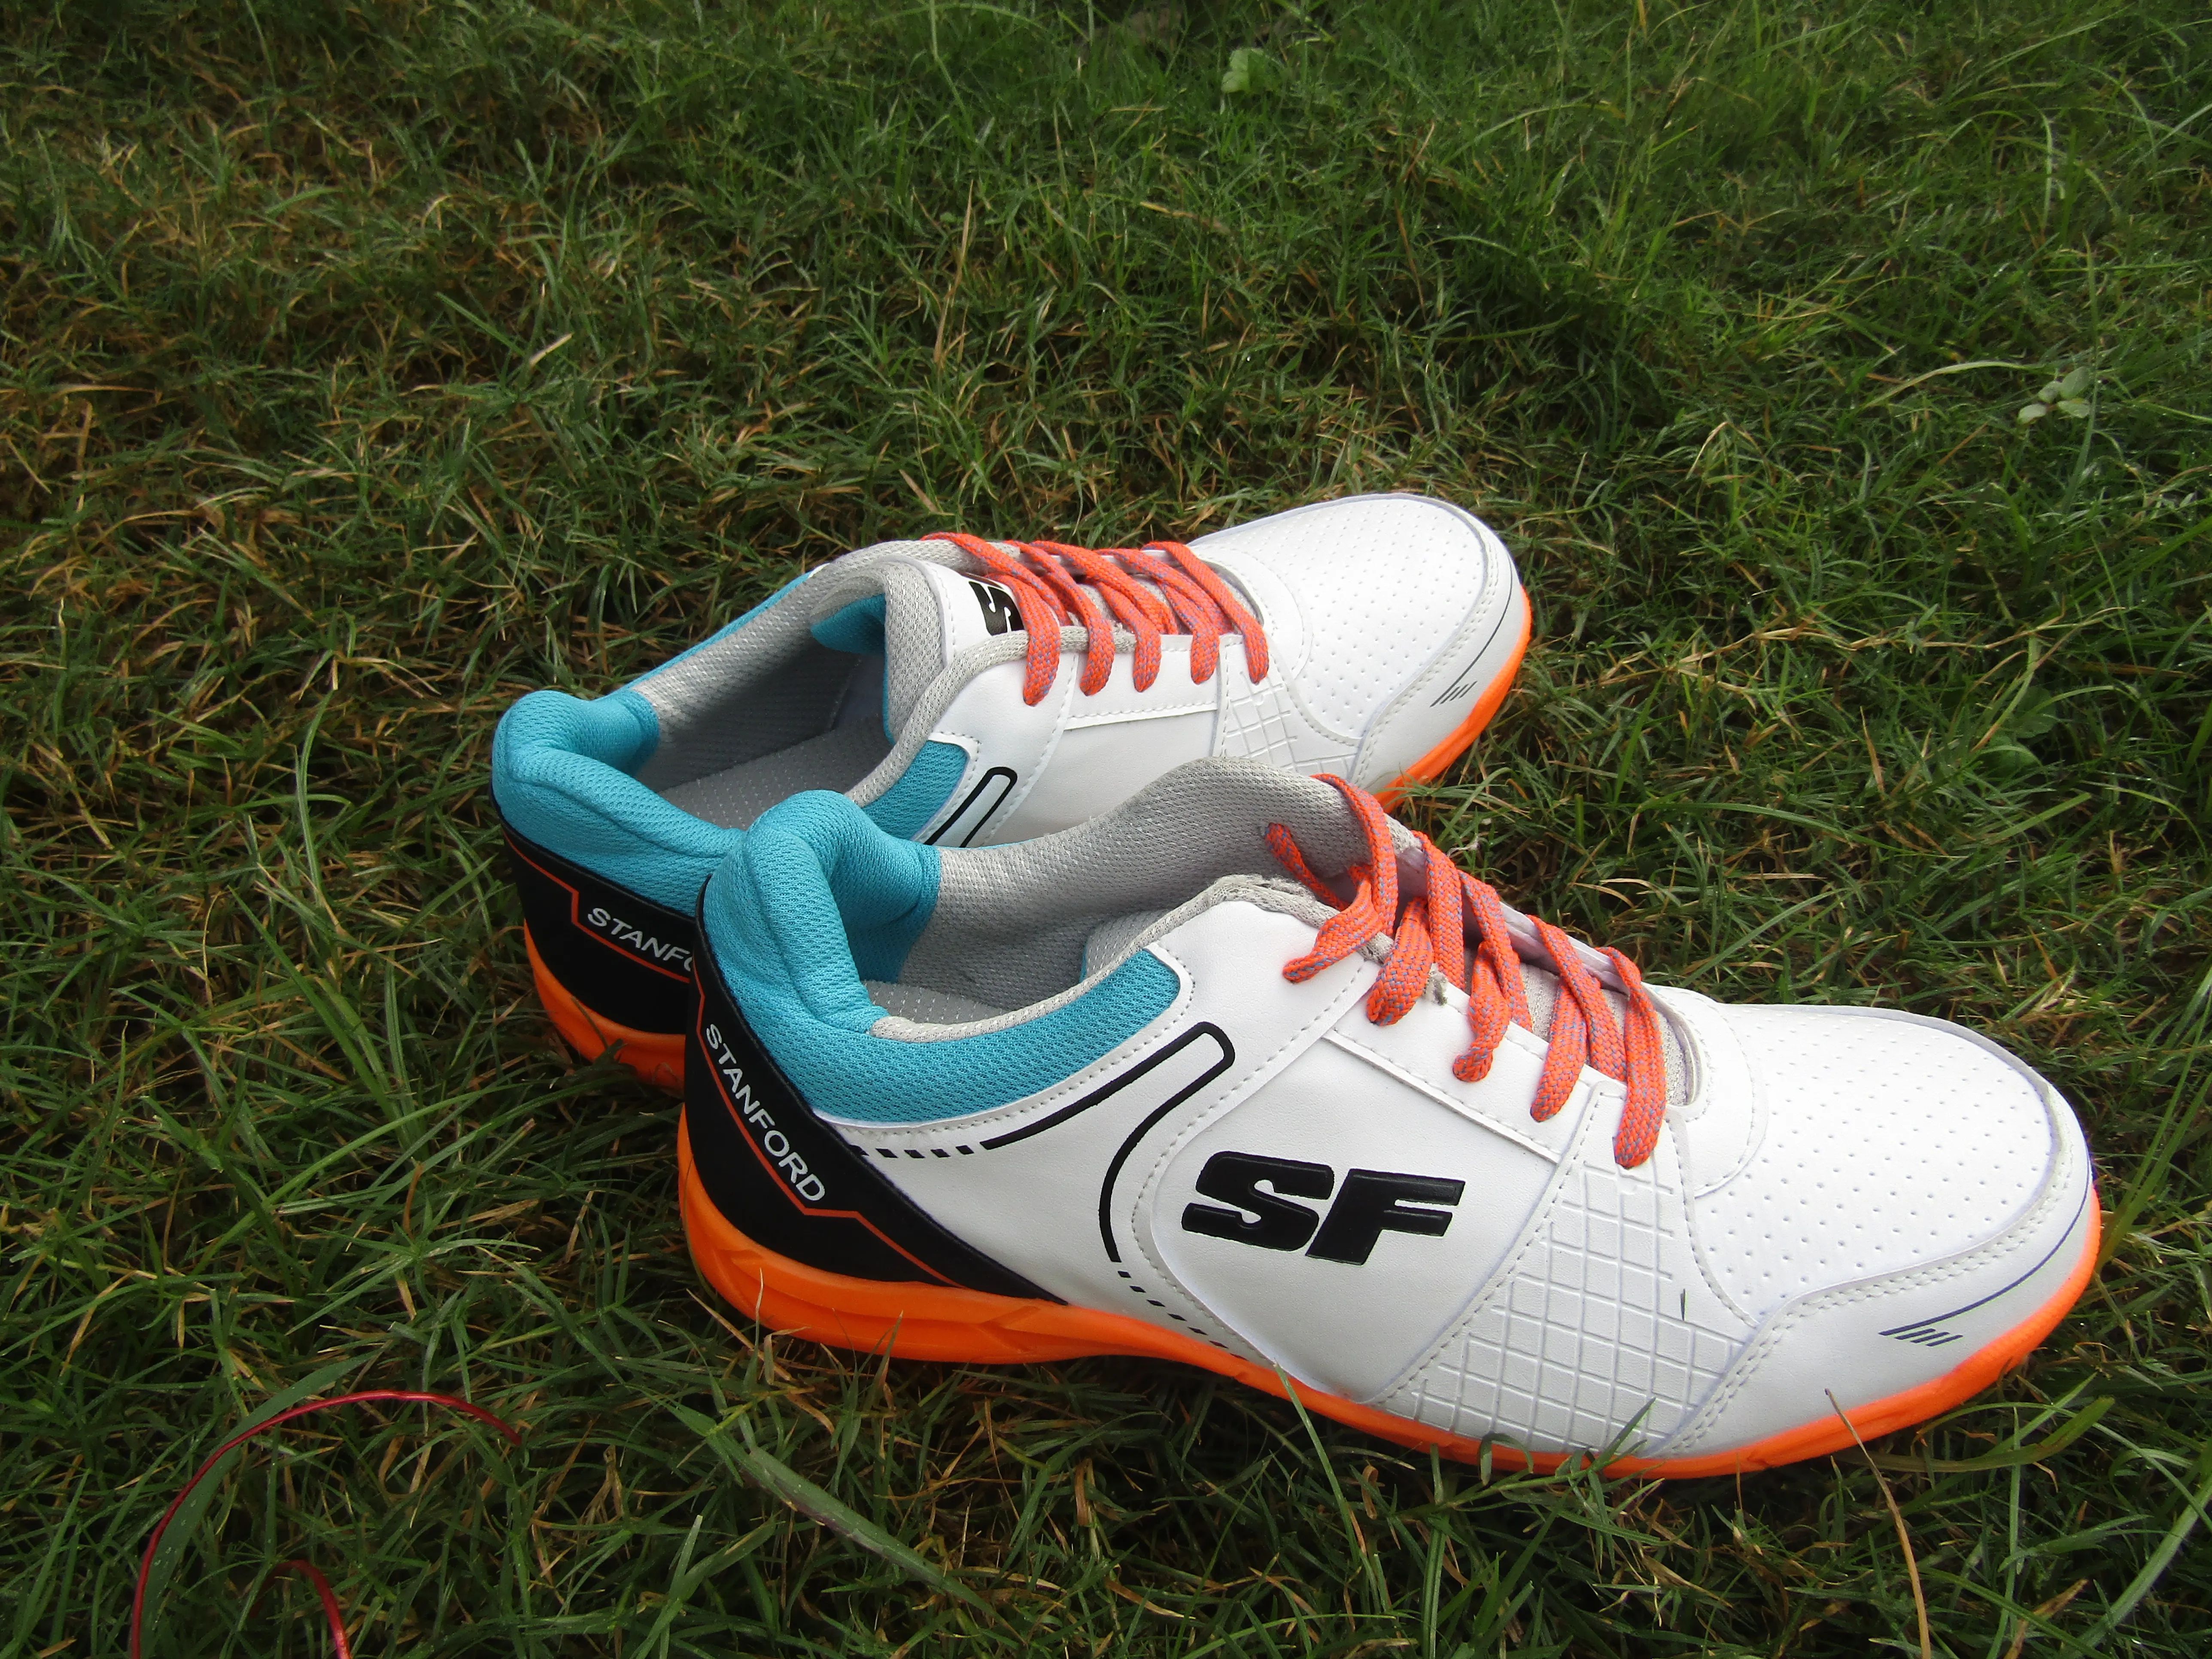 SF warrior Cricket Shoes teal and white